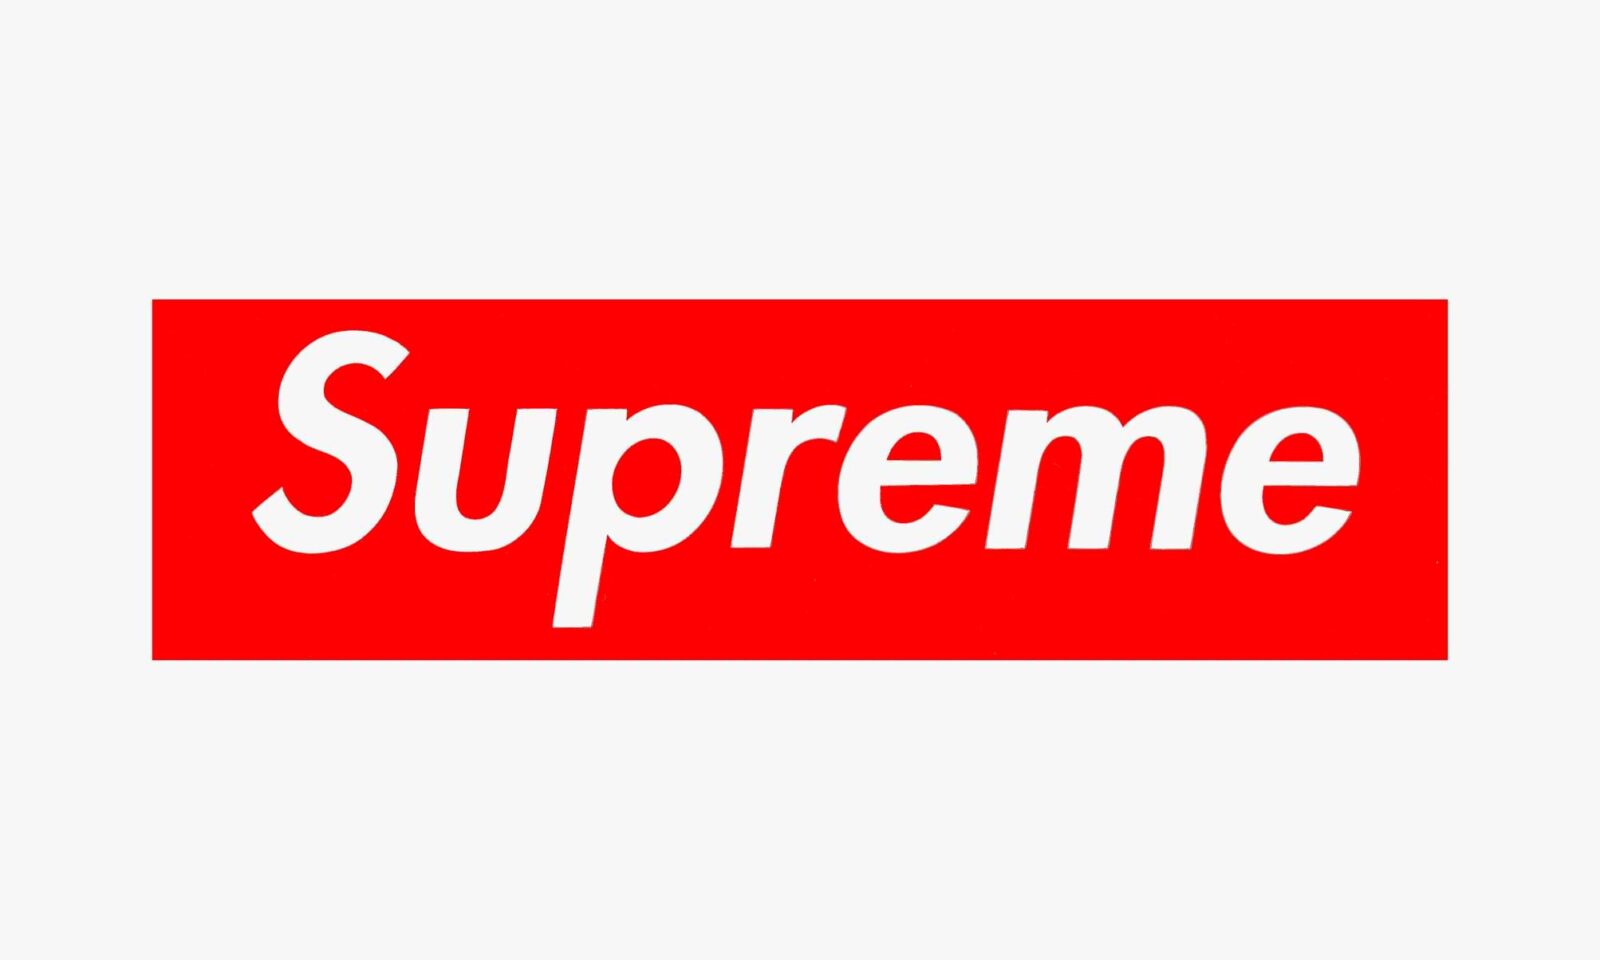 Ever wondered if your Supreme is fake